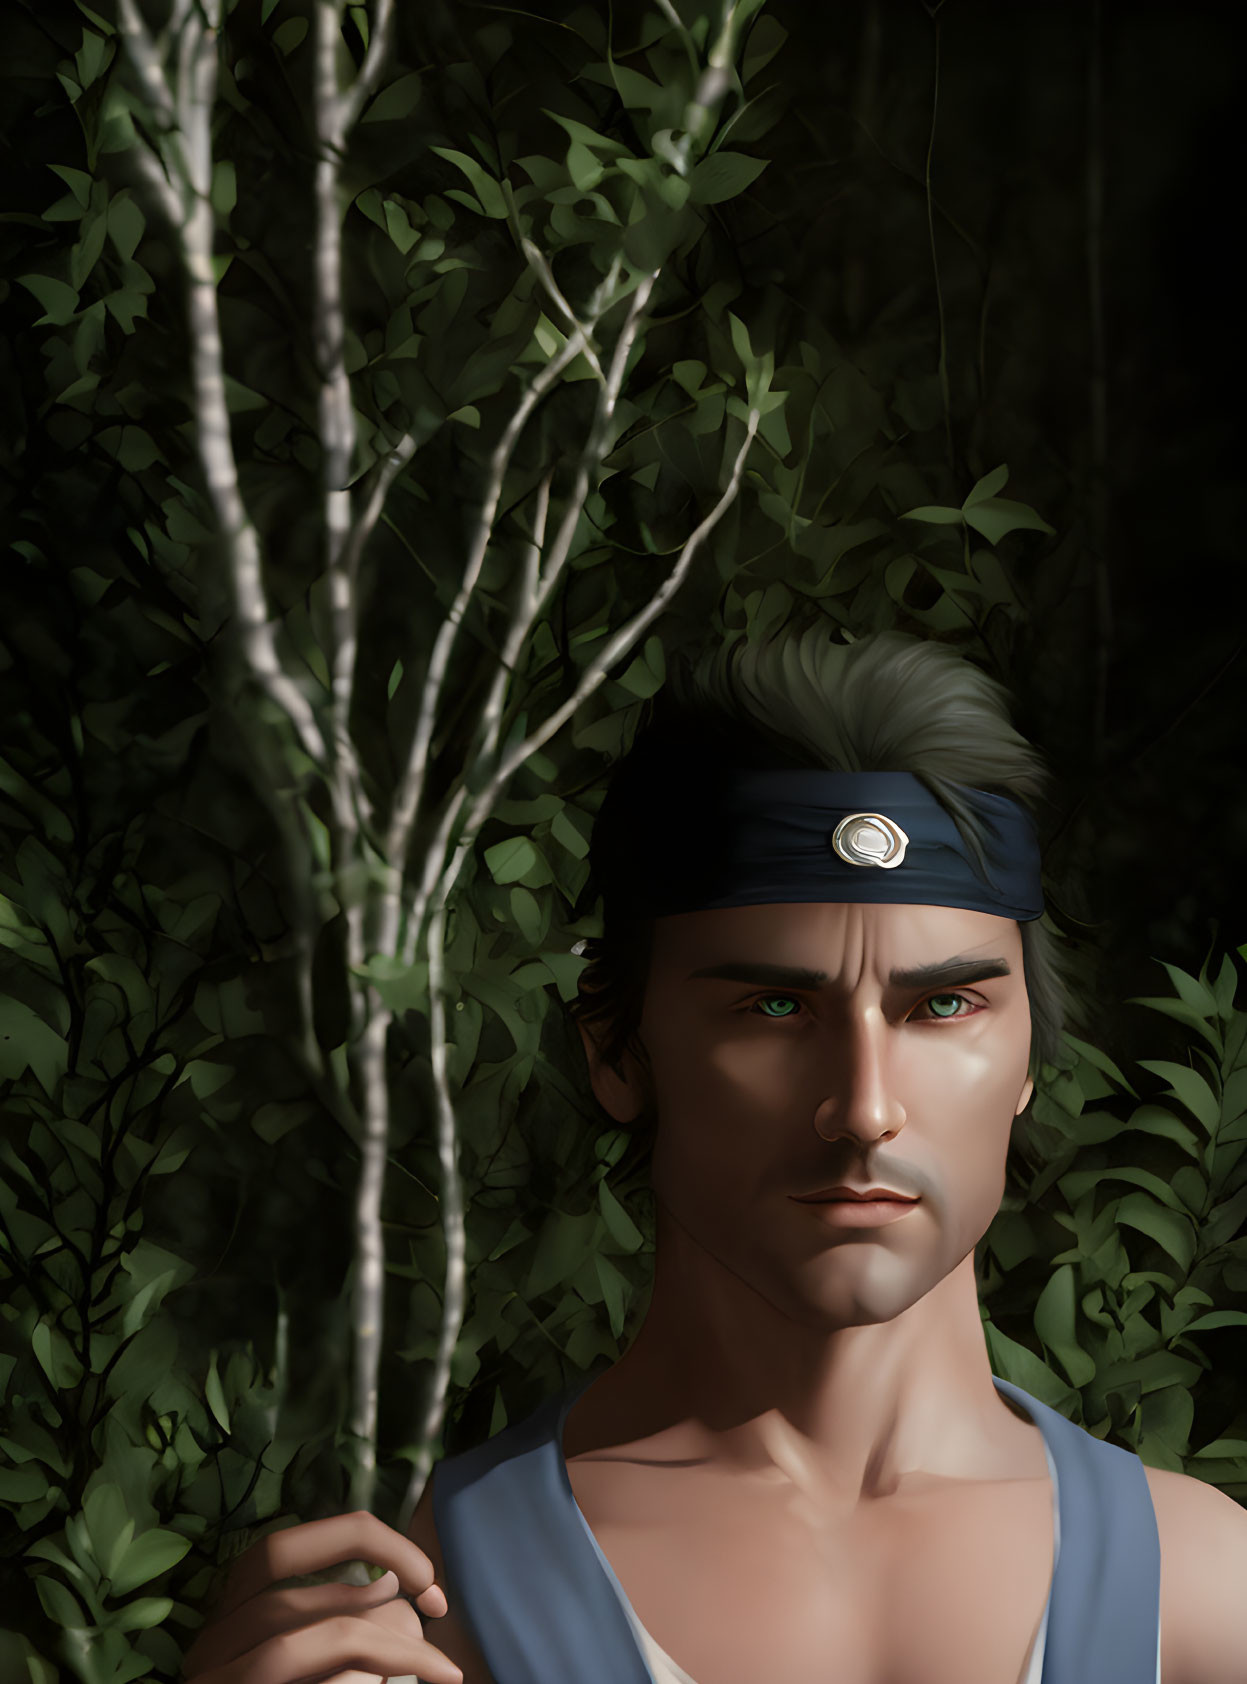 Man with circular symbol headband in forest with sunlight.